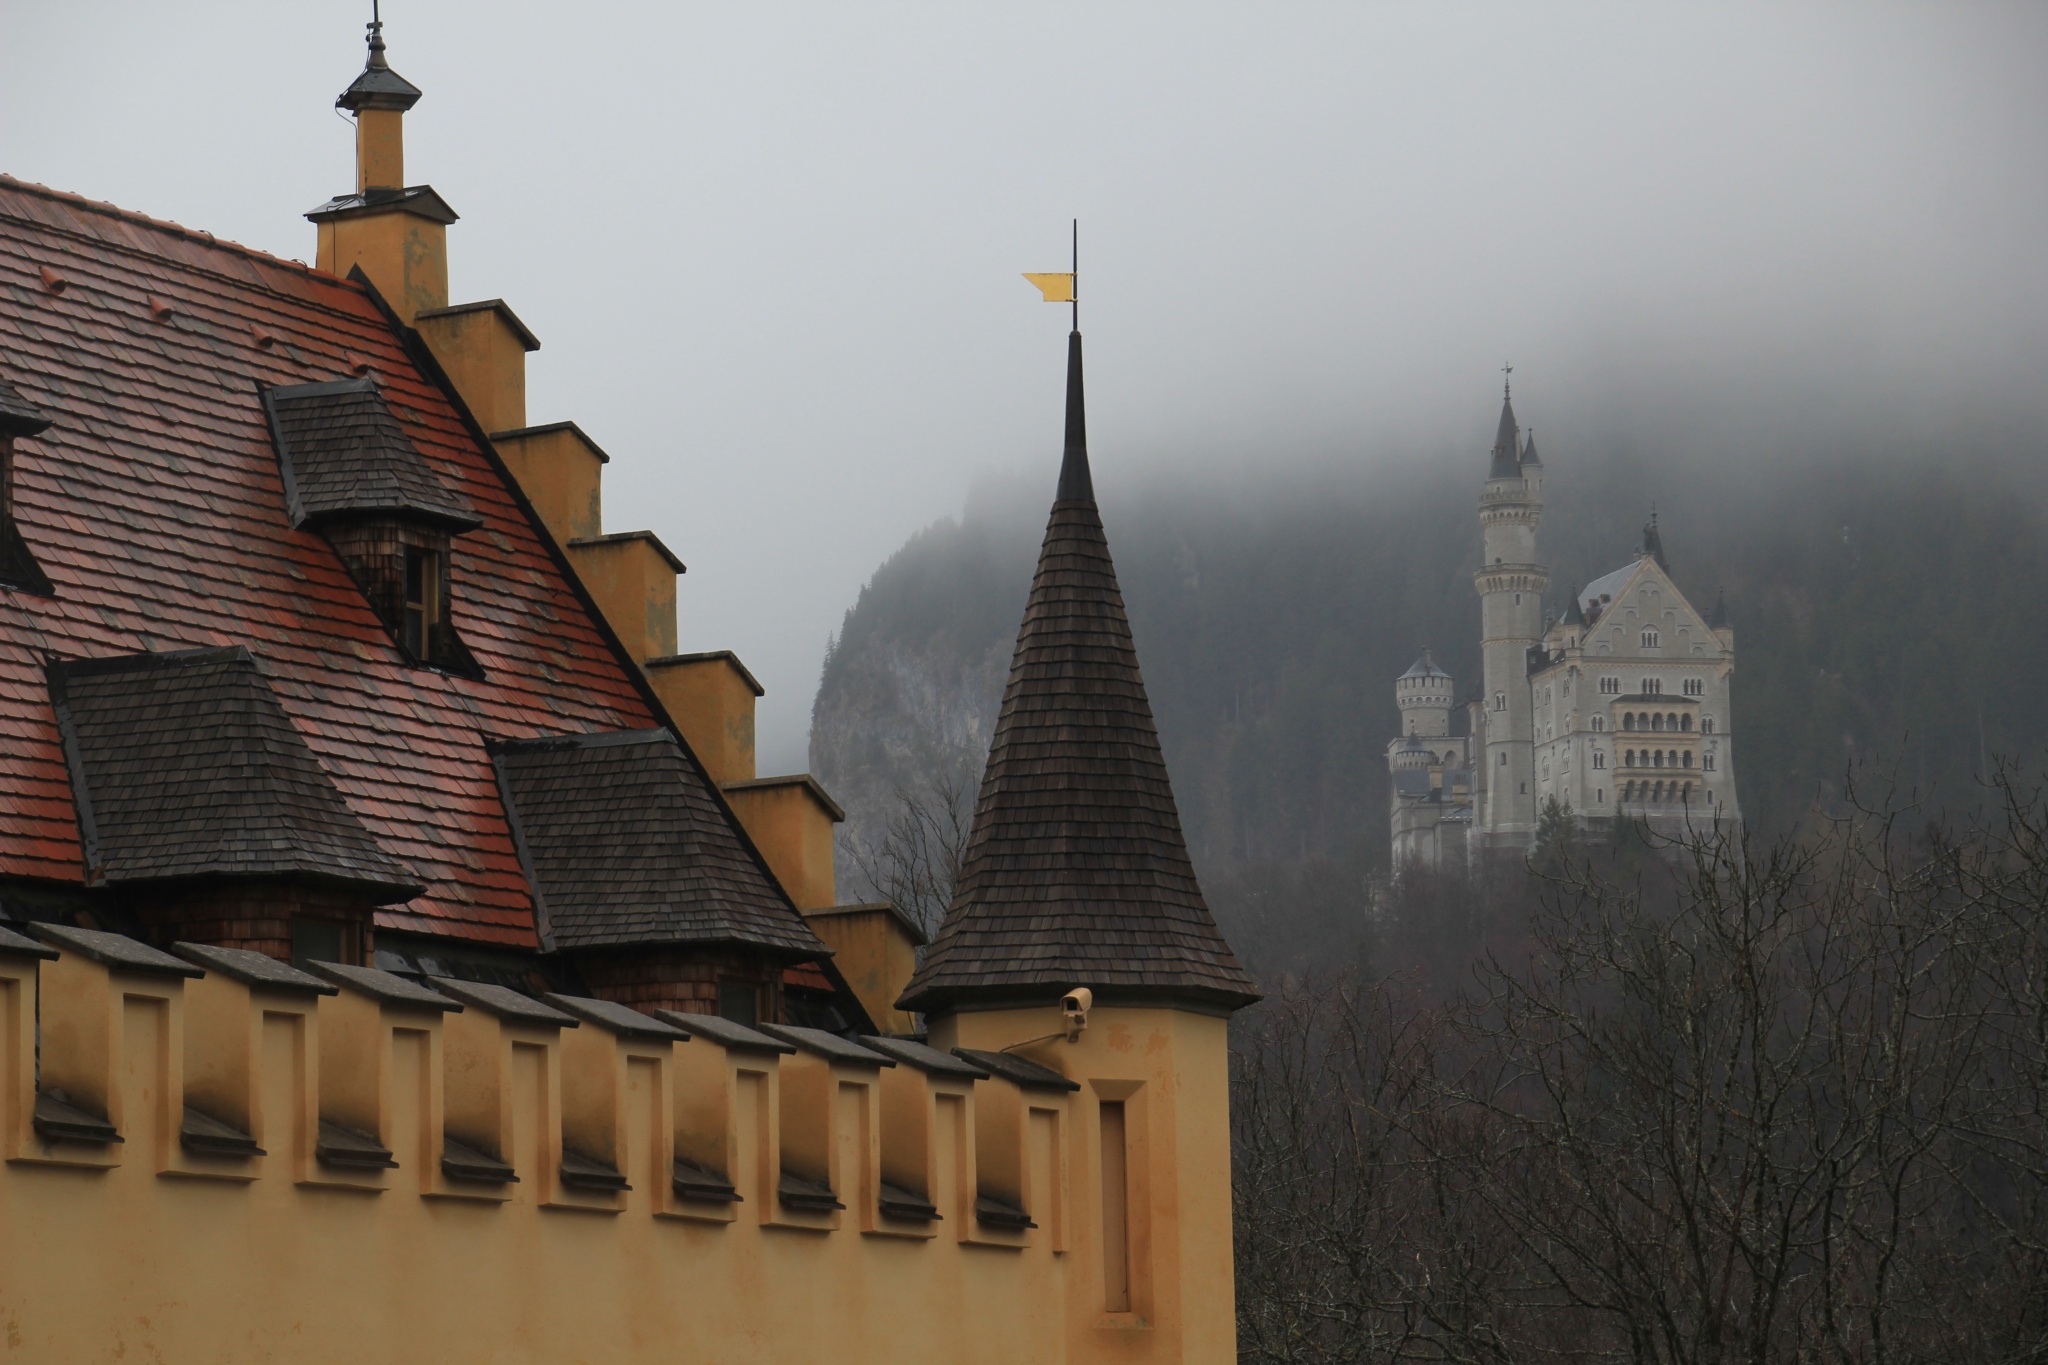 Ludwig II watched the builders' progress on Neuschwanstein with a telescope in the Music Room of Hohenschwangau.